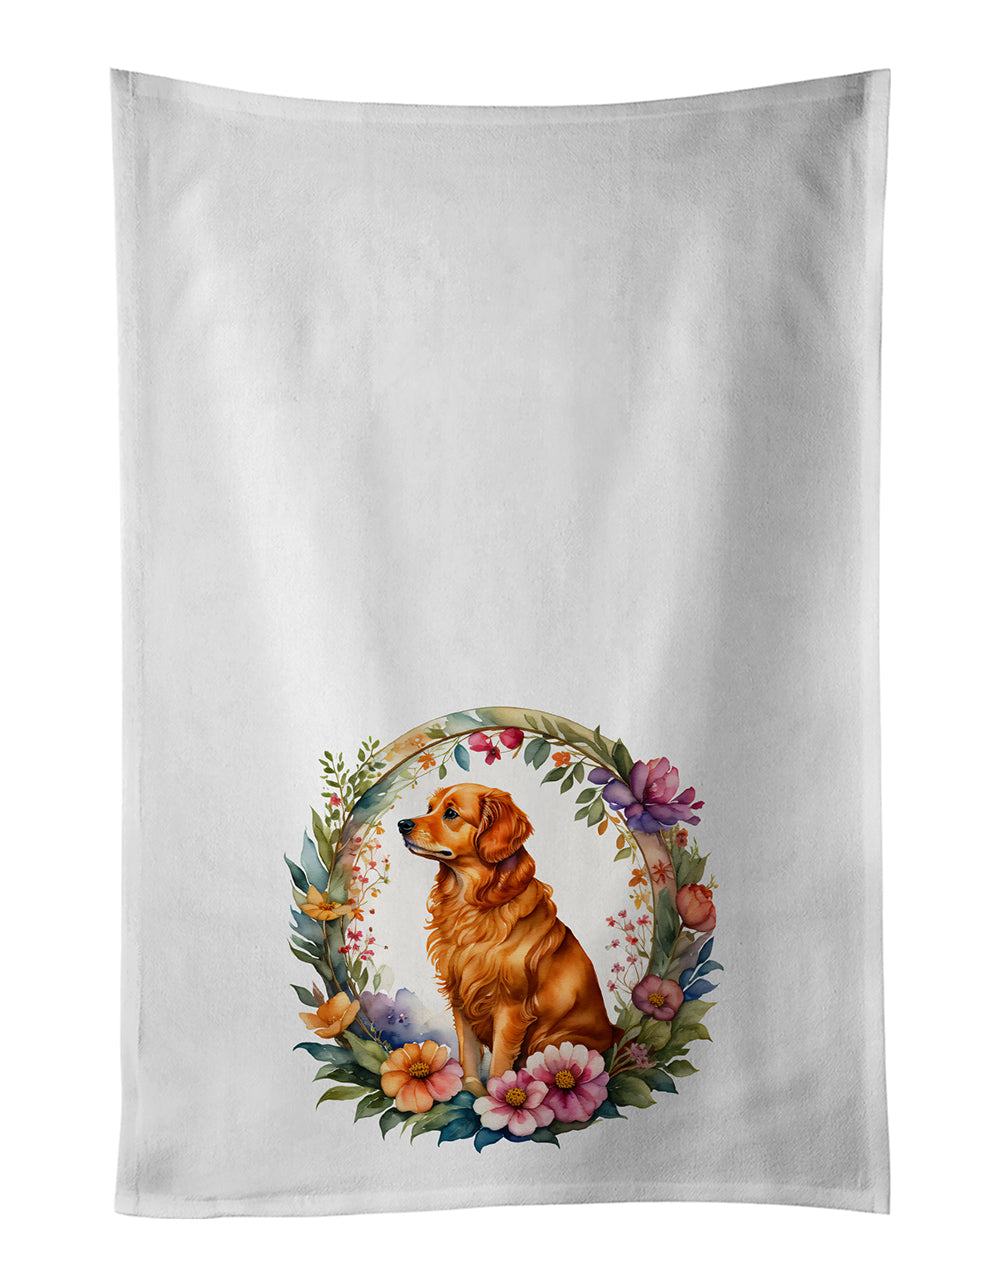 Buy this Nova Scotia Duck Tolling Retriever and Flowers Kitchen Towel Set of 2